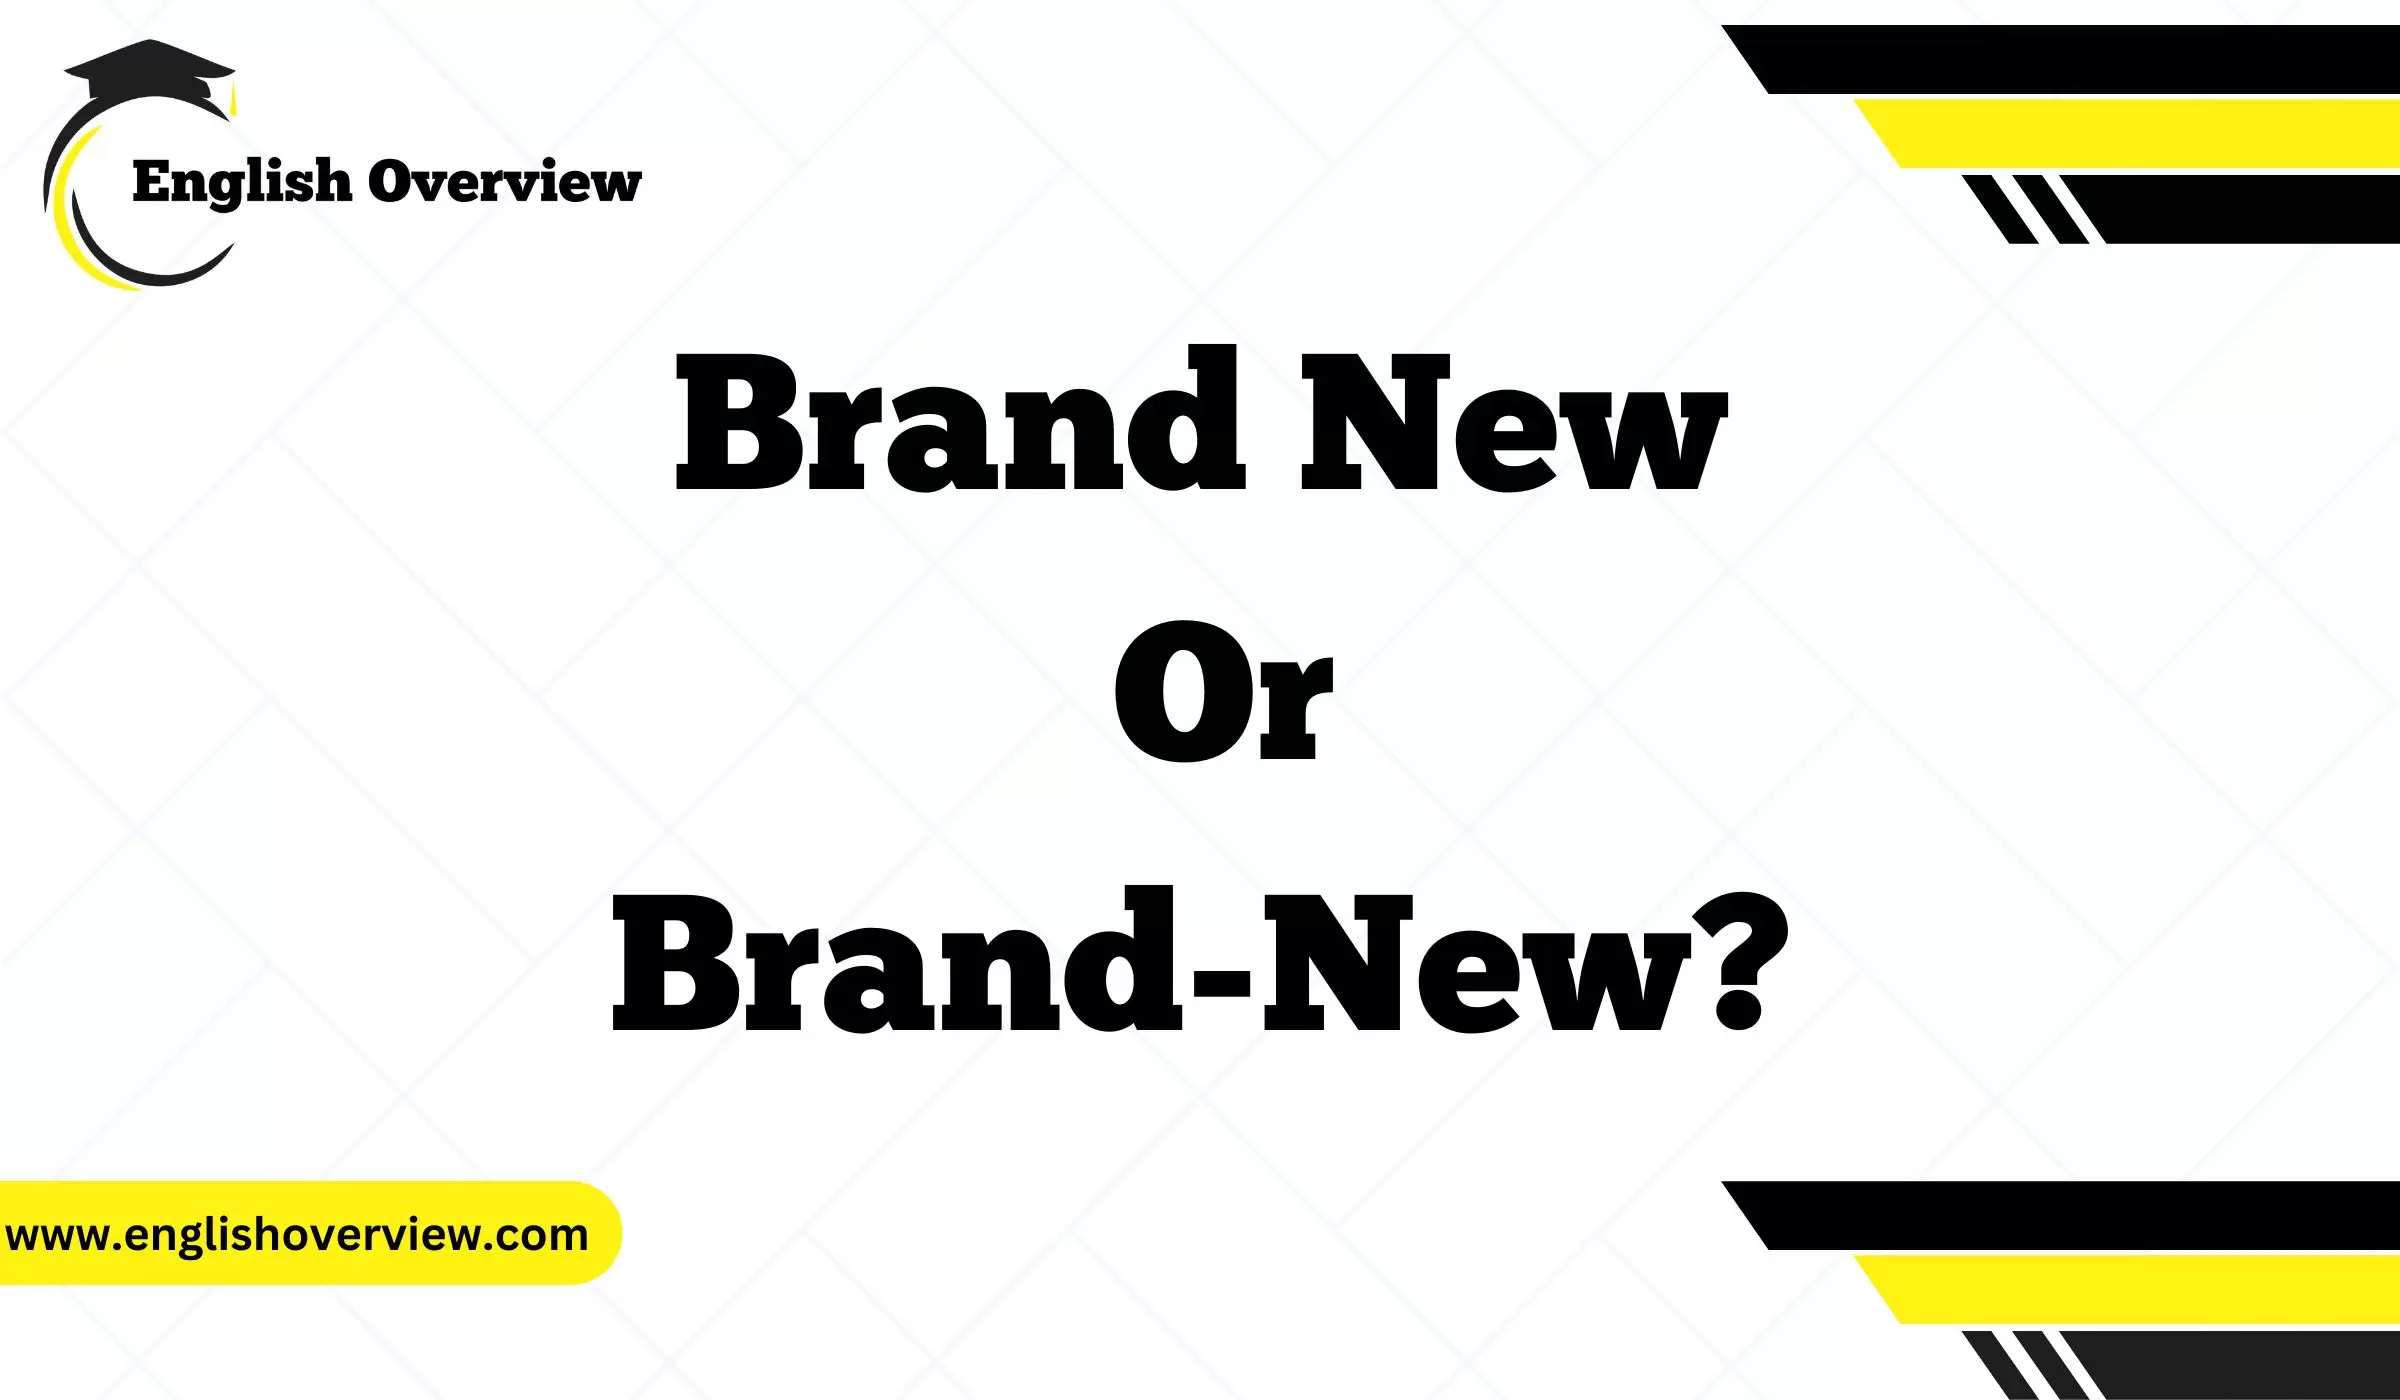 Brand New or Brand-New